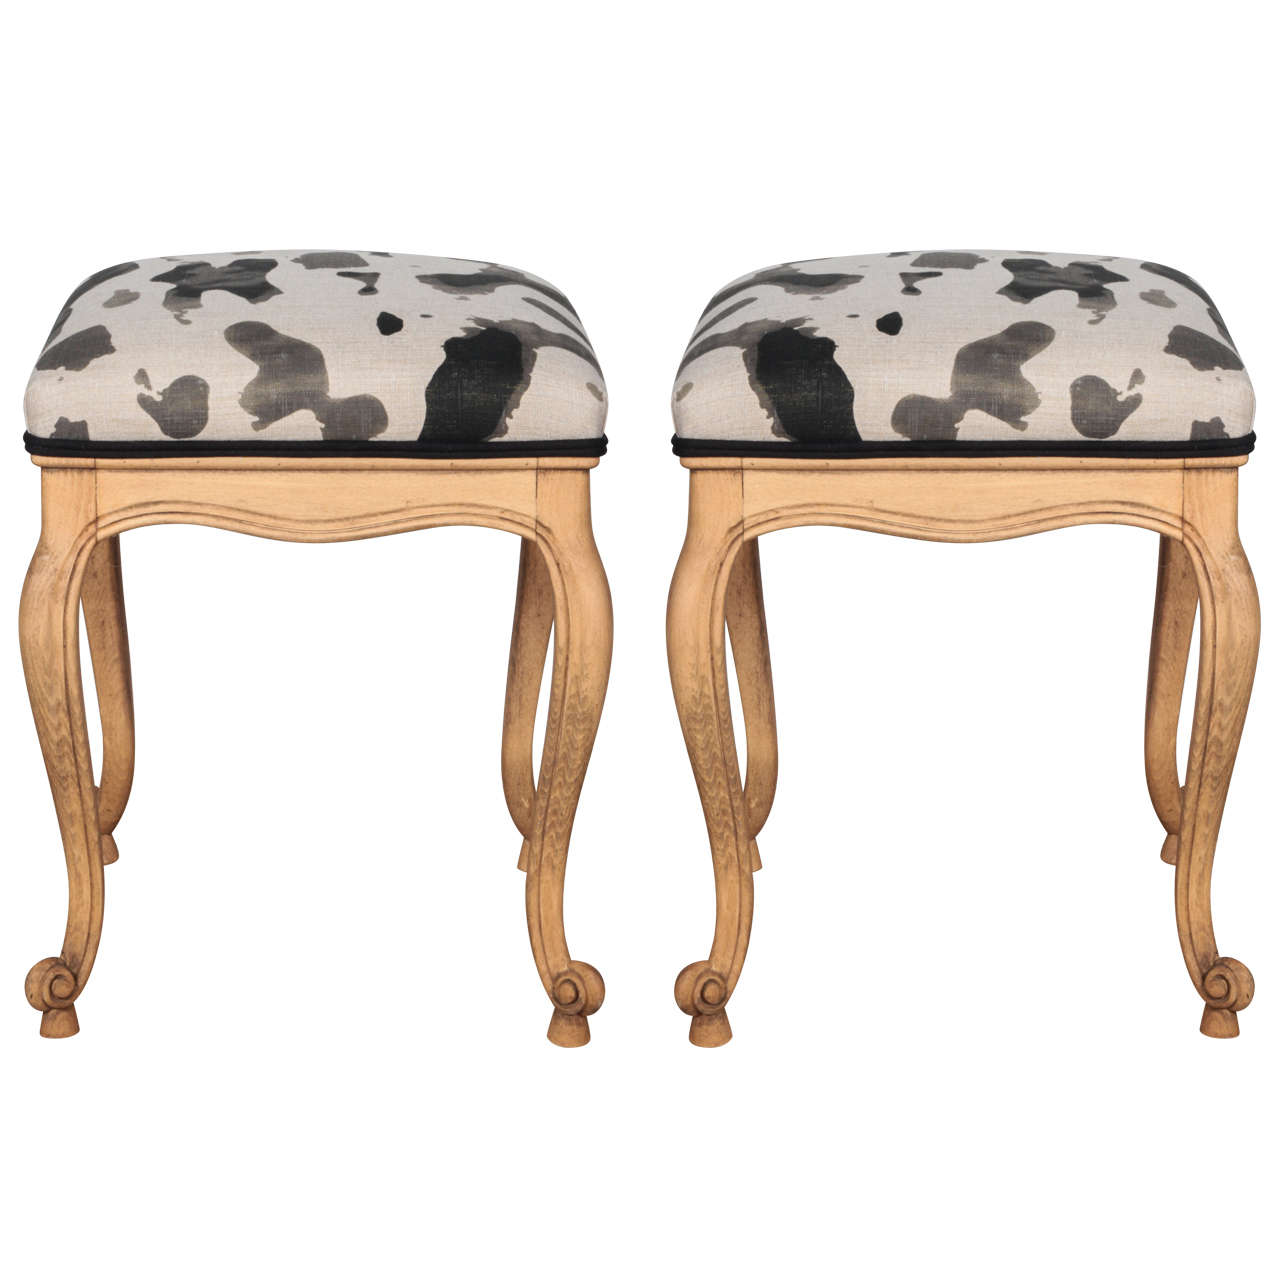 Pair of French Tabourets Upholstered in Camouflage For Sale